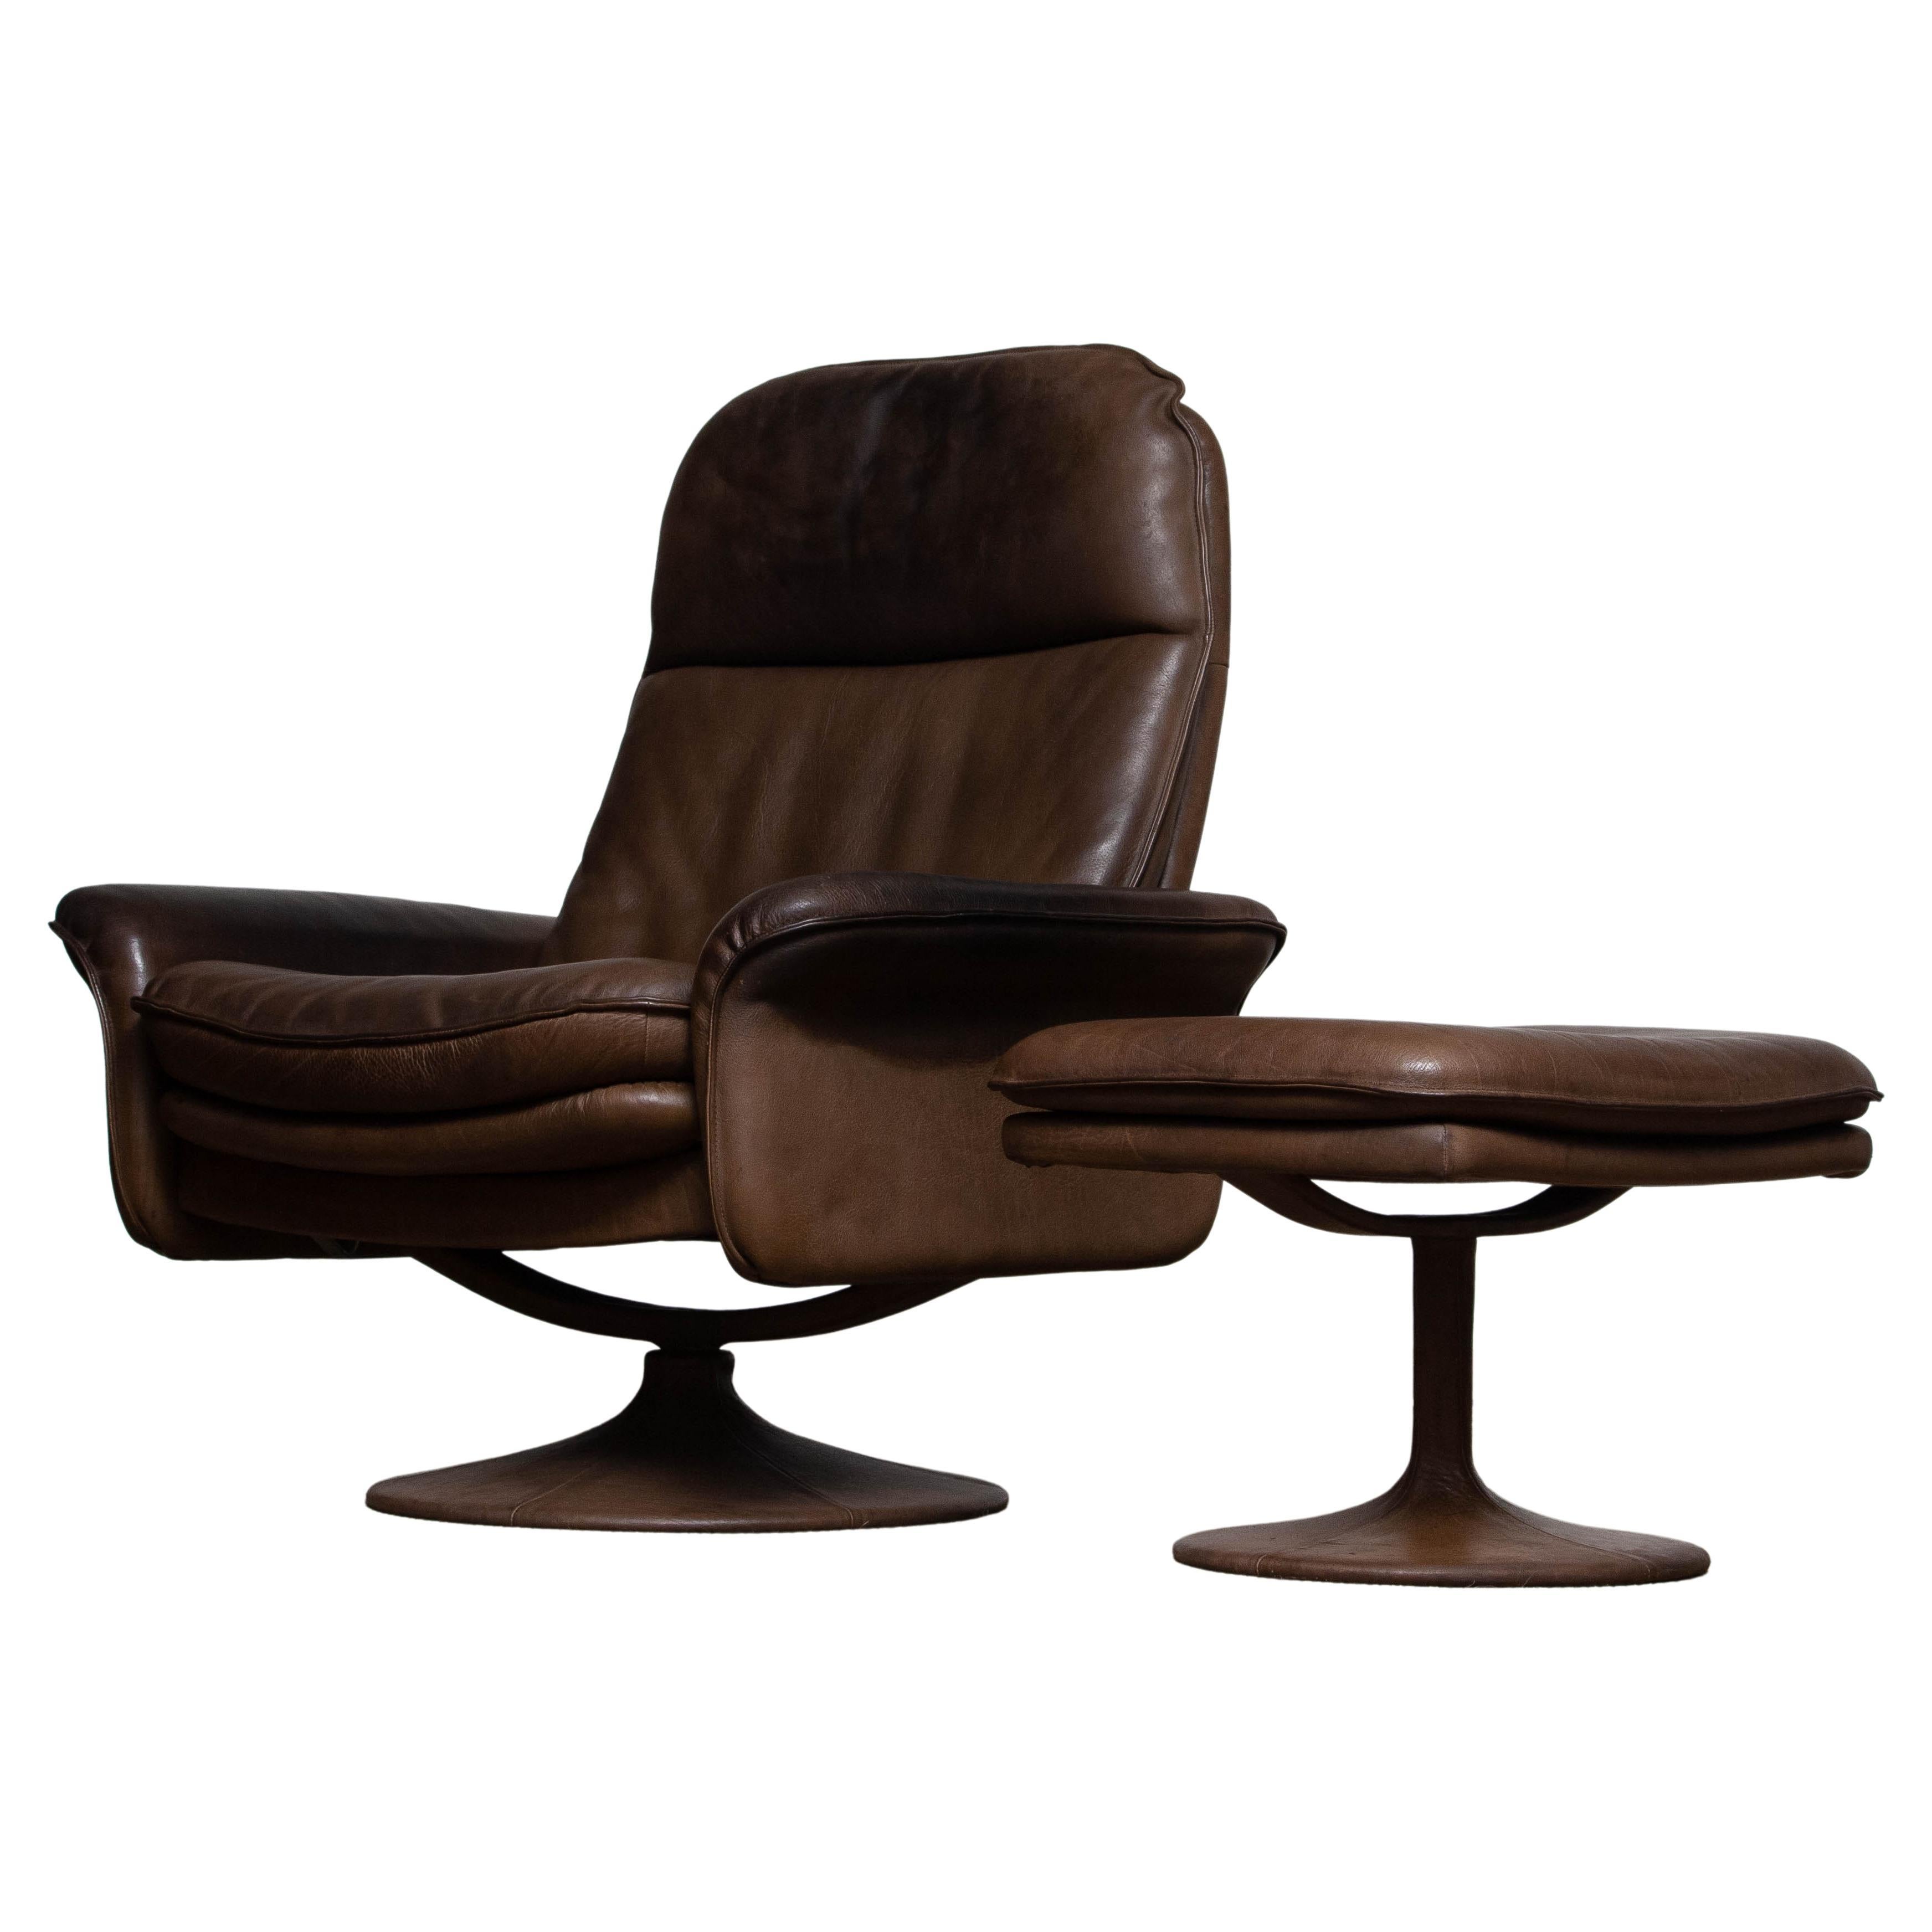 1970's Buffalo Leather Swivel and Relax Chair with Matching Ottoman by De Sede